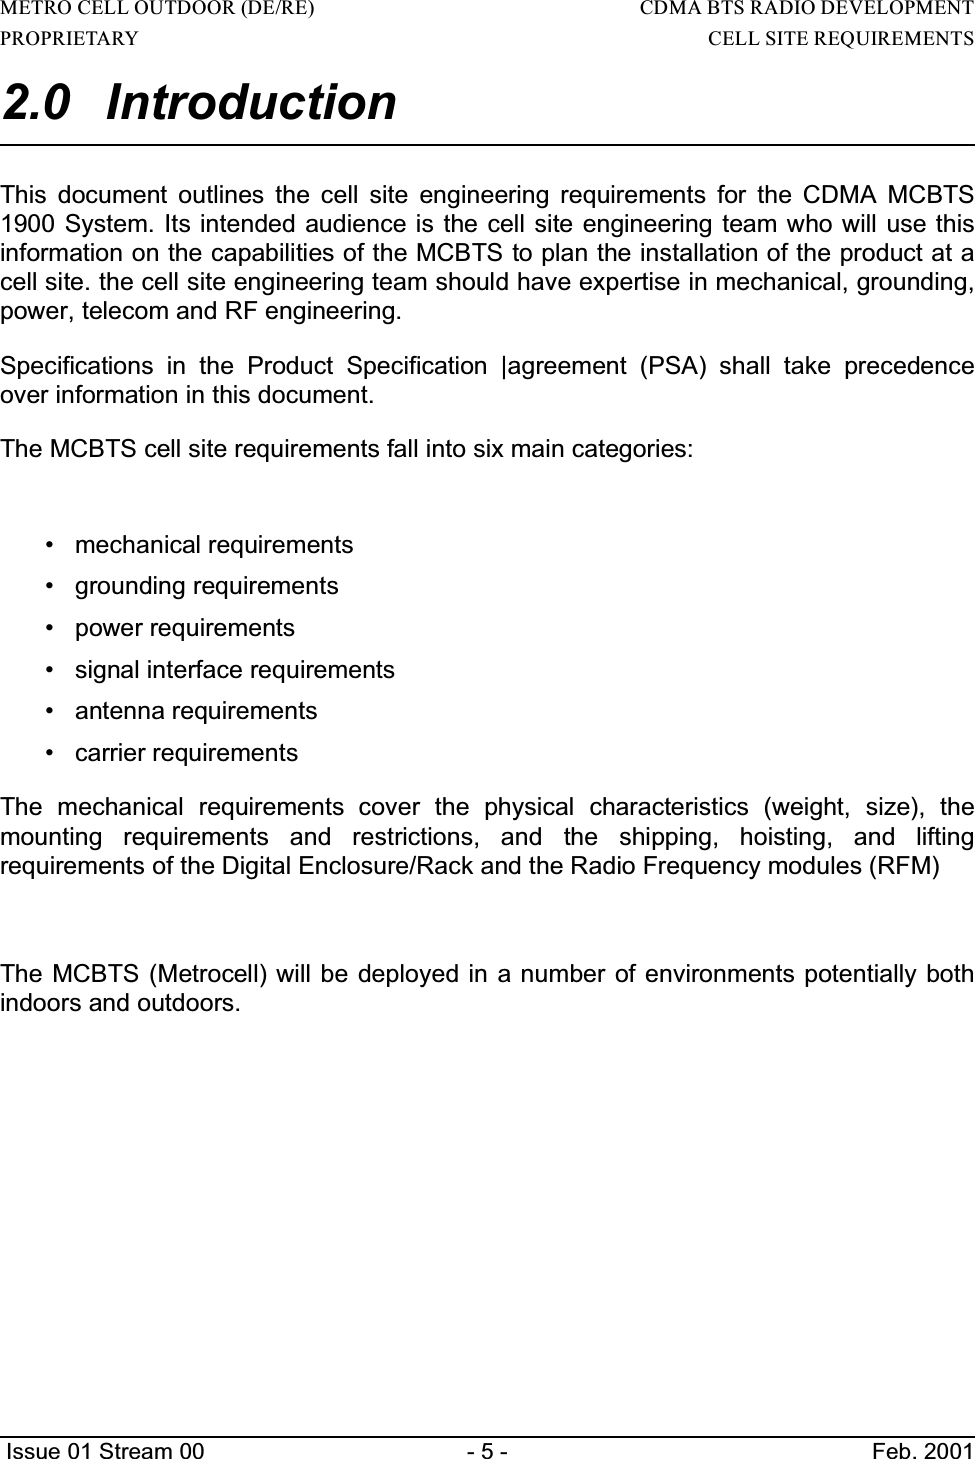 METRO CELL OUTDOOR (DE/RE)                                                                     CDMA BTS RADIO DEVELOPMENTPROPRIETARY                                                                                                                        CELL SITE REQUIREMENTS Issue 01 Stream 00 - 5 - Feb. 20012.0 IntroductionThis document outlines the cell site engineering requirements for the CDMA MCBTS1900 System. Its intended audience is the cell site engineering team who will use thisinformation on the capabilities of the MCBTS to plan the installation of the product at acell site. the cell site engineering team should have expertise in mechanical, grounding,power, telecom and RF engineering.Specifications in the Product Specification |agreement (PSA) shall take precedenceover information in this document.The MCBTS cell site requirements fall into six main categories:• mechanical requirements• grounding requirements• power requirements• signal interface requirements• antenna requirements• carrier requirementsThe mechanical requirements cover the physical characteristics (weight, size), themounting requirements and restrictions, and the shipping, hoisting, and liftingrequirements of the Digital Enclosure/Rack and the Radio Frequency modules (RFM)The MCBTS (Metrocell) will be deployed in a number of environments potentially bothindoors and outdoors.                                           